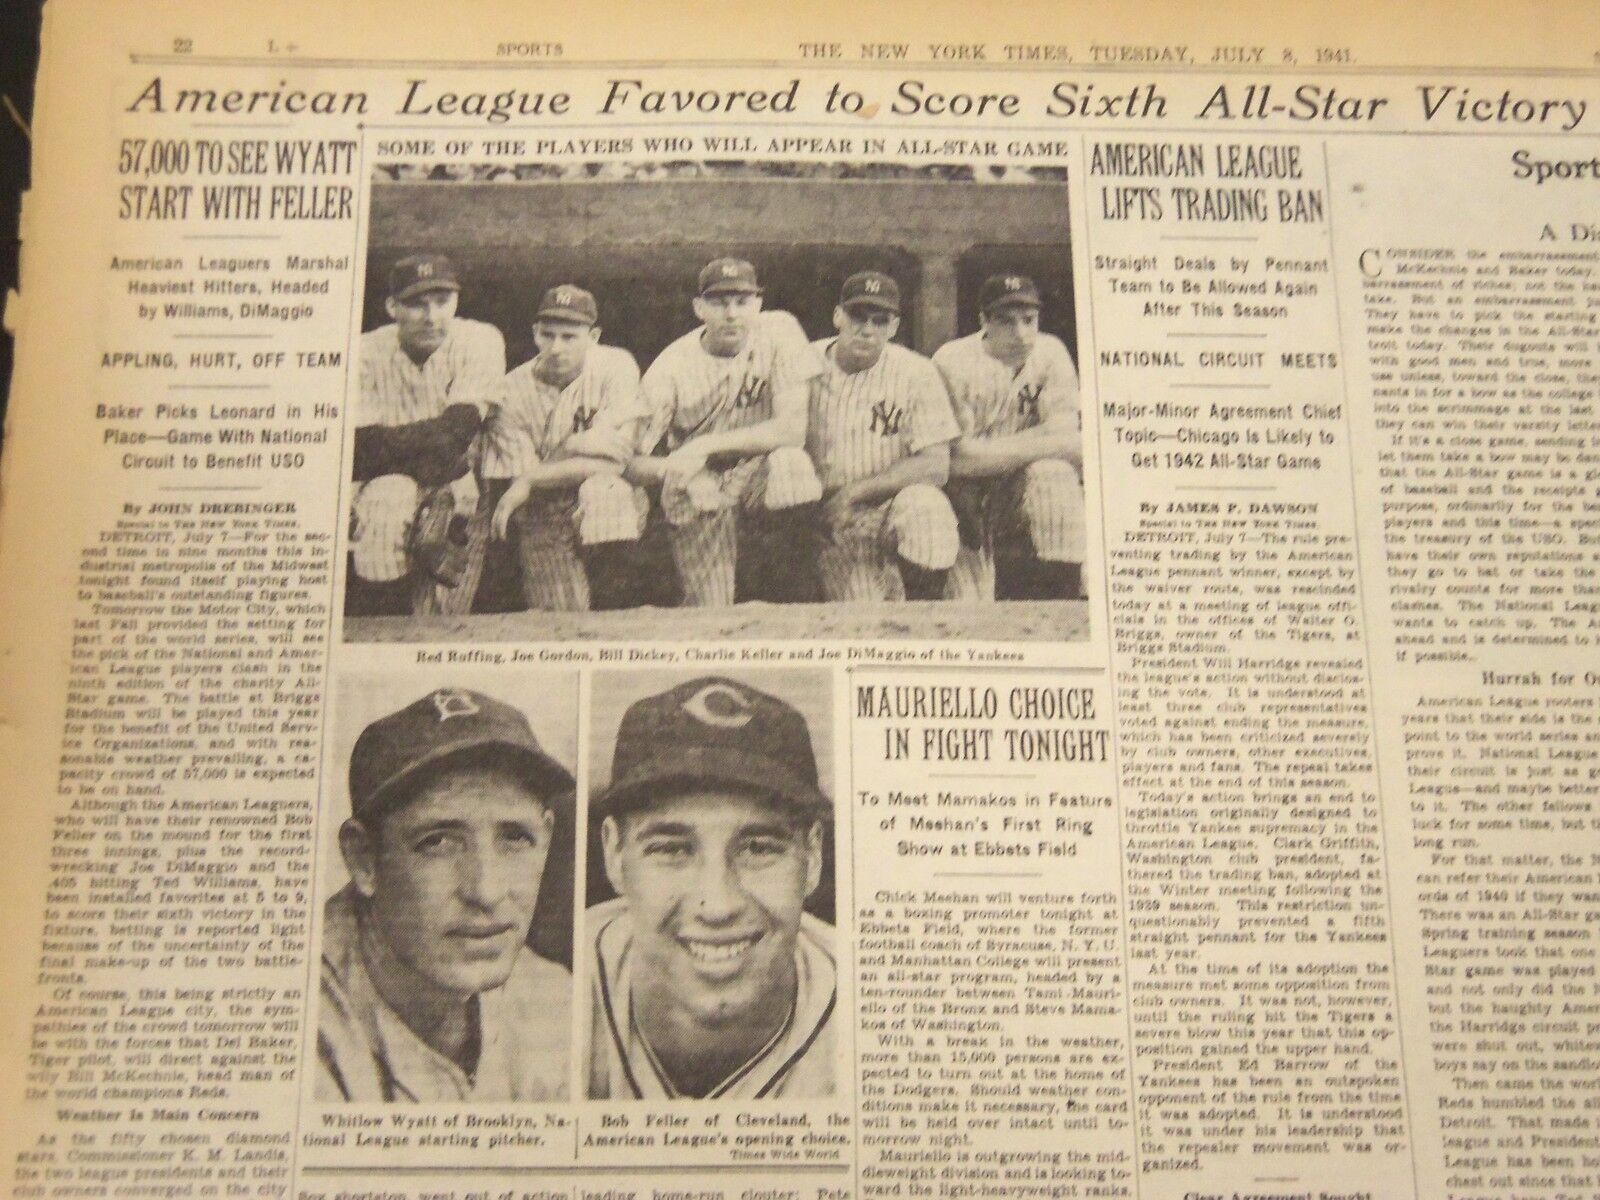 1941 JULY 8 NEW YORK TIMES - AMERICAN LEAGUE FAVORED IN ALL-STAR GAME - NT 5153